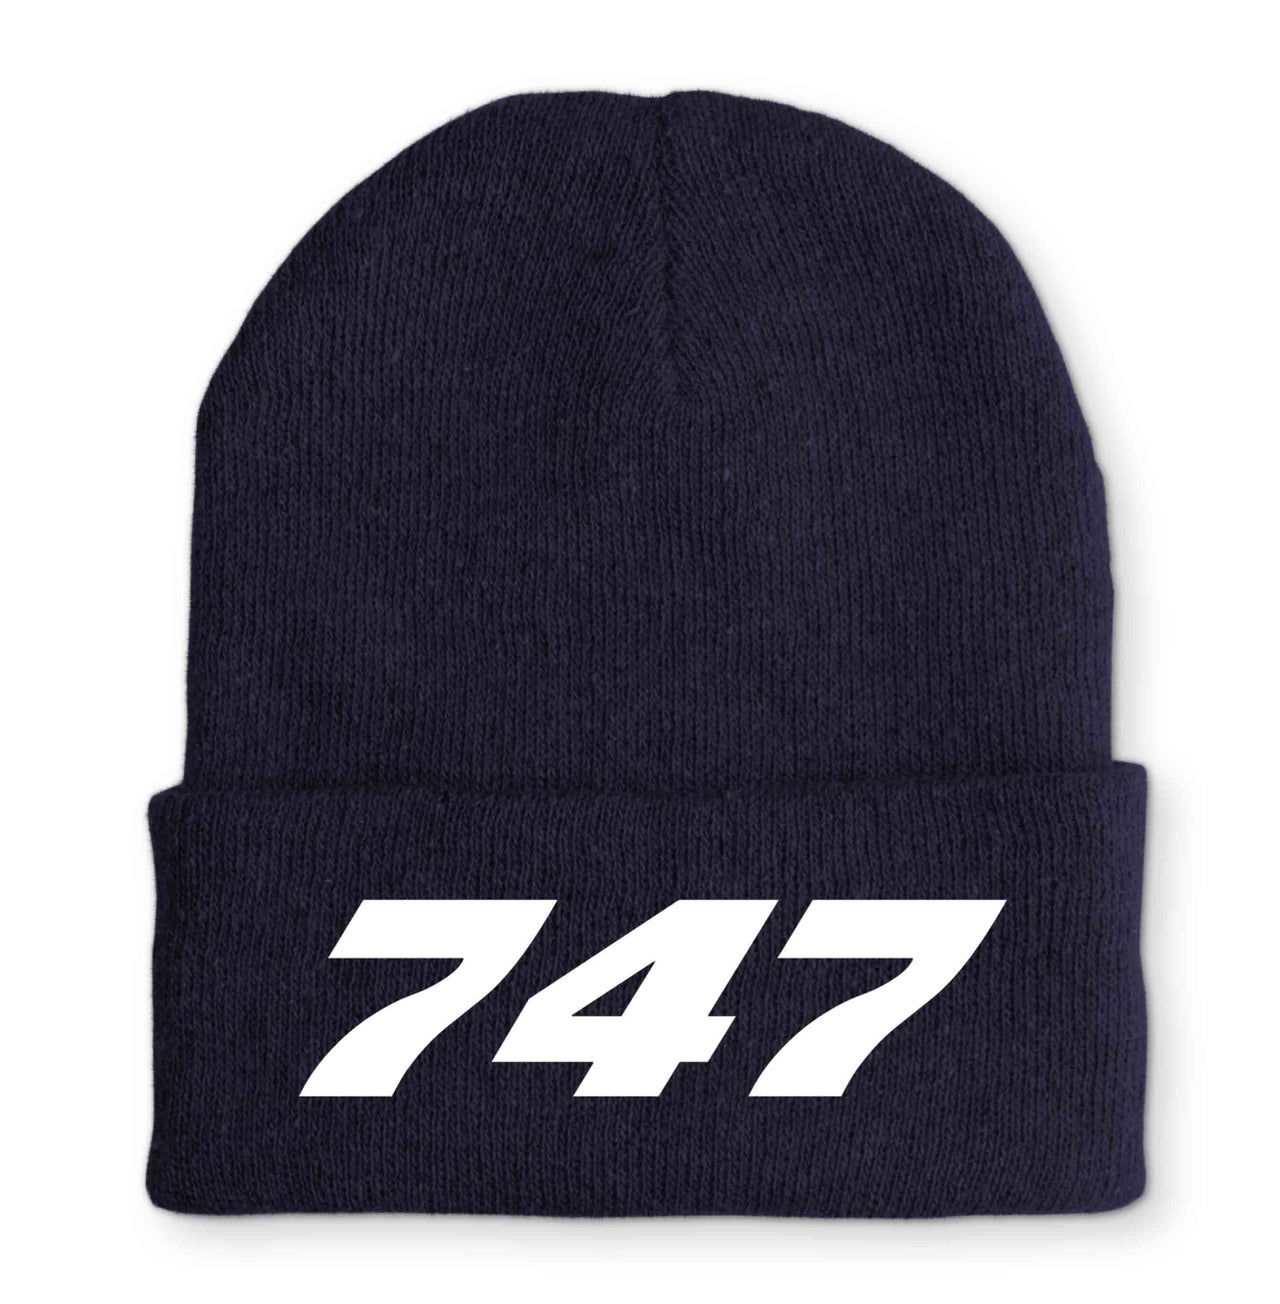 747 Flat Text Embroidered Beanies